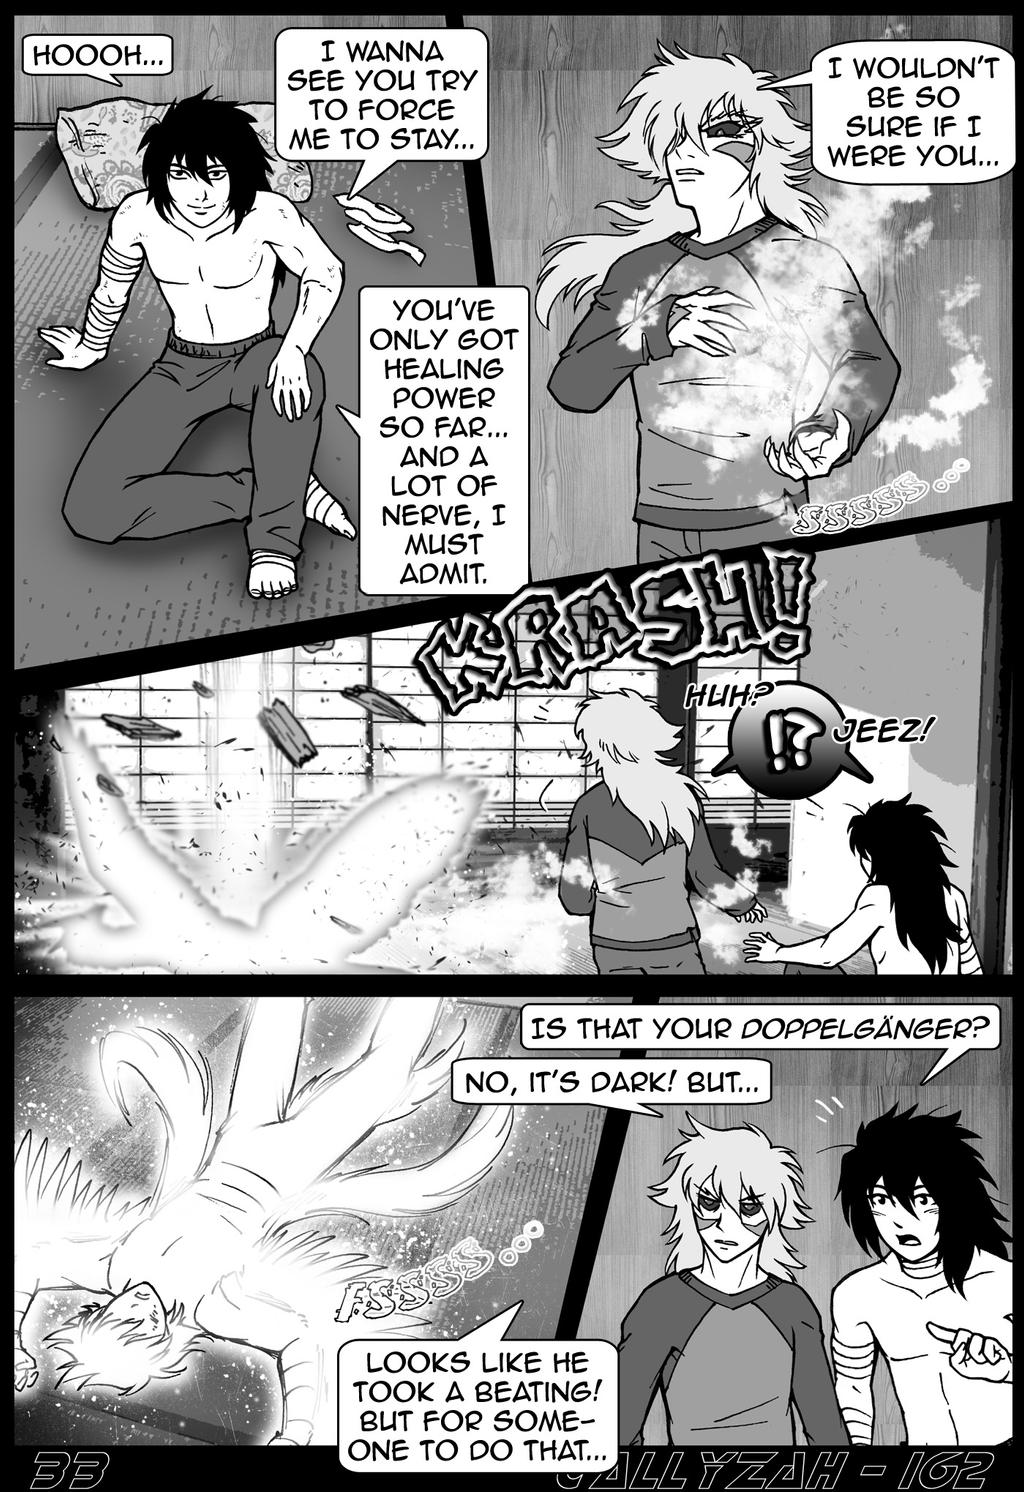 A miracle smile - PAGE 18 by RunStrayWolf on DeviantArt